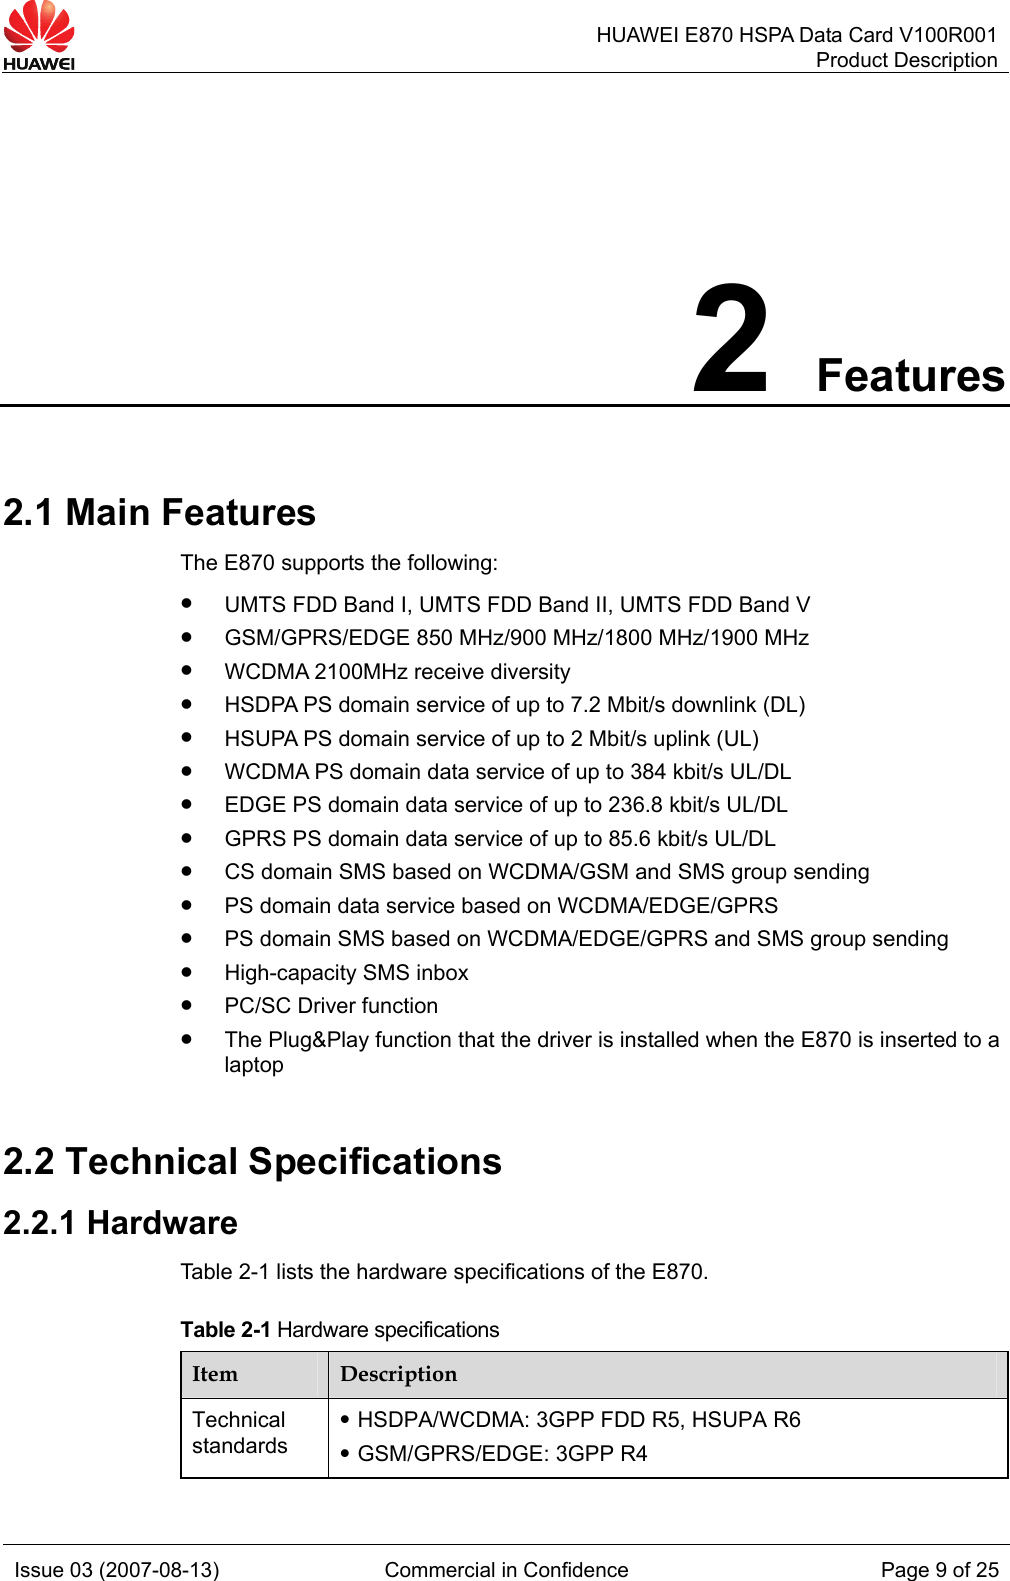   HUAWEI E870 HSPA Data Card V100R001Product Description Issue 03 (2007-08-13)  Commercial in Confidence  Page 9 of 25 2 Features 2.1 Main Features The E870 supports the following: z UMTS FDD Band I, UMTS FDD Band II, UMTS FDD Band V   z GSM/GPRS/EDGE 850 MHz/900 MHz/1800 MHz/1900 MHz z WCDMA 2100MHz receive diversity   z HSDPA PS domain service of up to 7.2 Mbit/s downlink (DL) z HSUPA PS domain service of up to 2 Mbit/s uplink (UL) z WCDMA PS domain data service of up to 384 kbit/s UL/DL z EDGE PS domain data service of up to 236.8 kbit/s UL/DL z GPRS PS domain data service of up to 85.6 kbit/s UL/DL z CS domain SMS based on WCDMA/GSM and SMS group sending z PS domain data service based on WCDMA/EDGE/GPRS z PS domain SMS based on WCDMA/EDGE/GPRS and SMS group sending z High-capacity SMS inbox z PC/SC Driver function z The Plug&amp;Play function that the driver is installed when the E870 is inserted to a laptop 2.2 Technical Specifications 2.2.1 Hardware Table 2-1 lists the hardware specifications of the E870. Table 2-1 Hardware specifications Item  Description Technical standards z HSDPA/WCDMA: 3GPP FDD R5, HSUPA R6 z GSM/GPRS/EDGE: 3GPP R4 